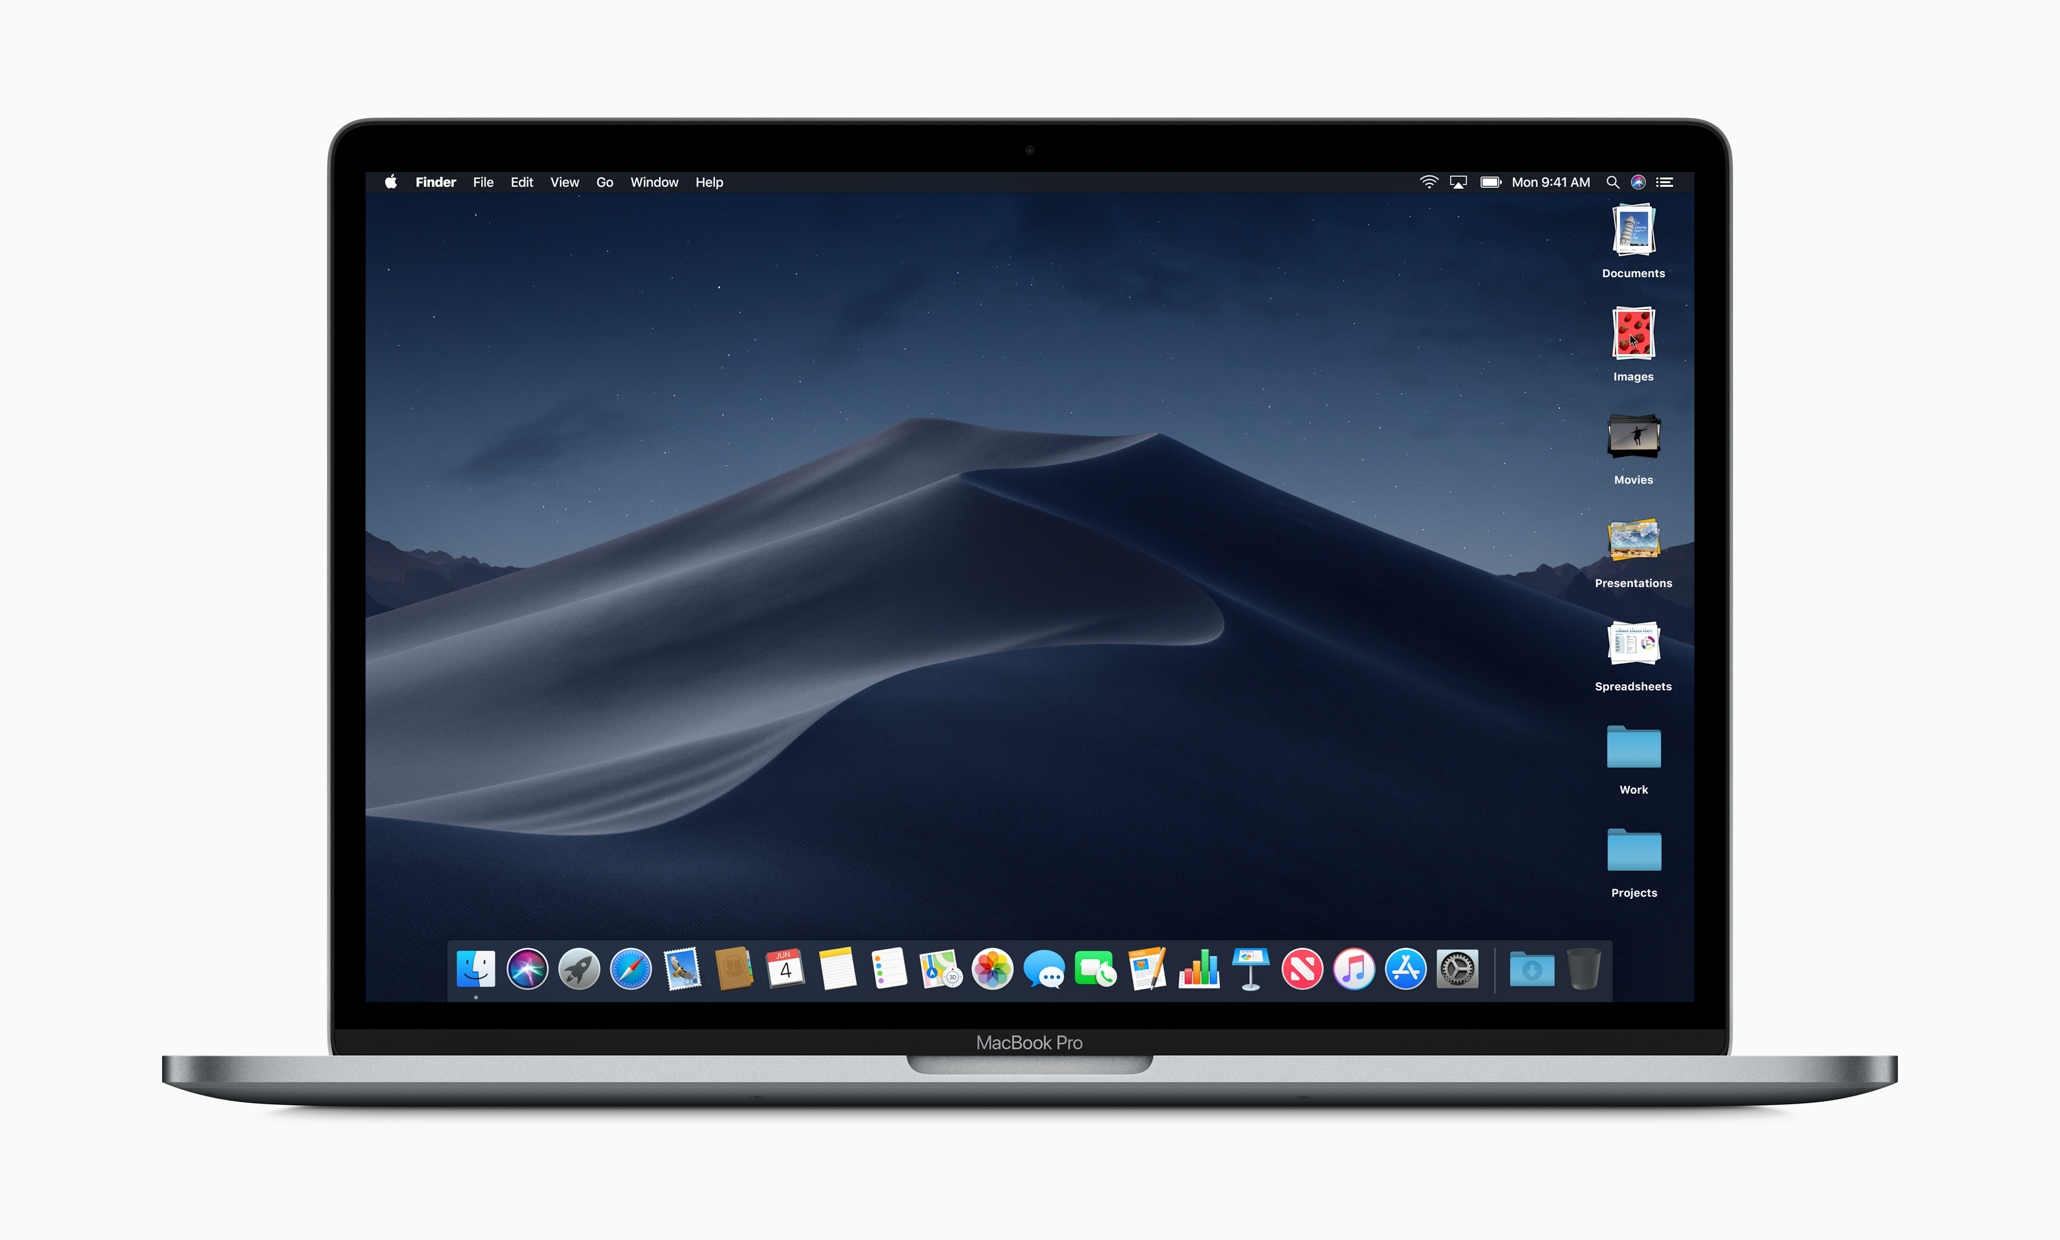 The new Dark Mode will give Mac users an alternative look to their screens, while Dynamic Desktop adds a time-shifting feature that adjusts the desktop background image based on time of day. Image: Apple.